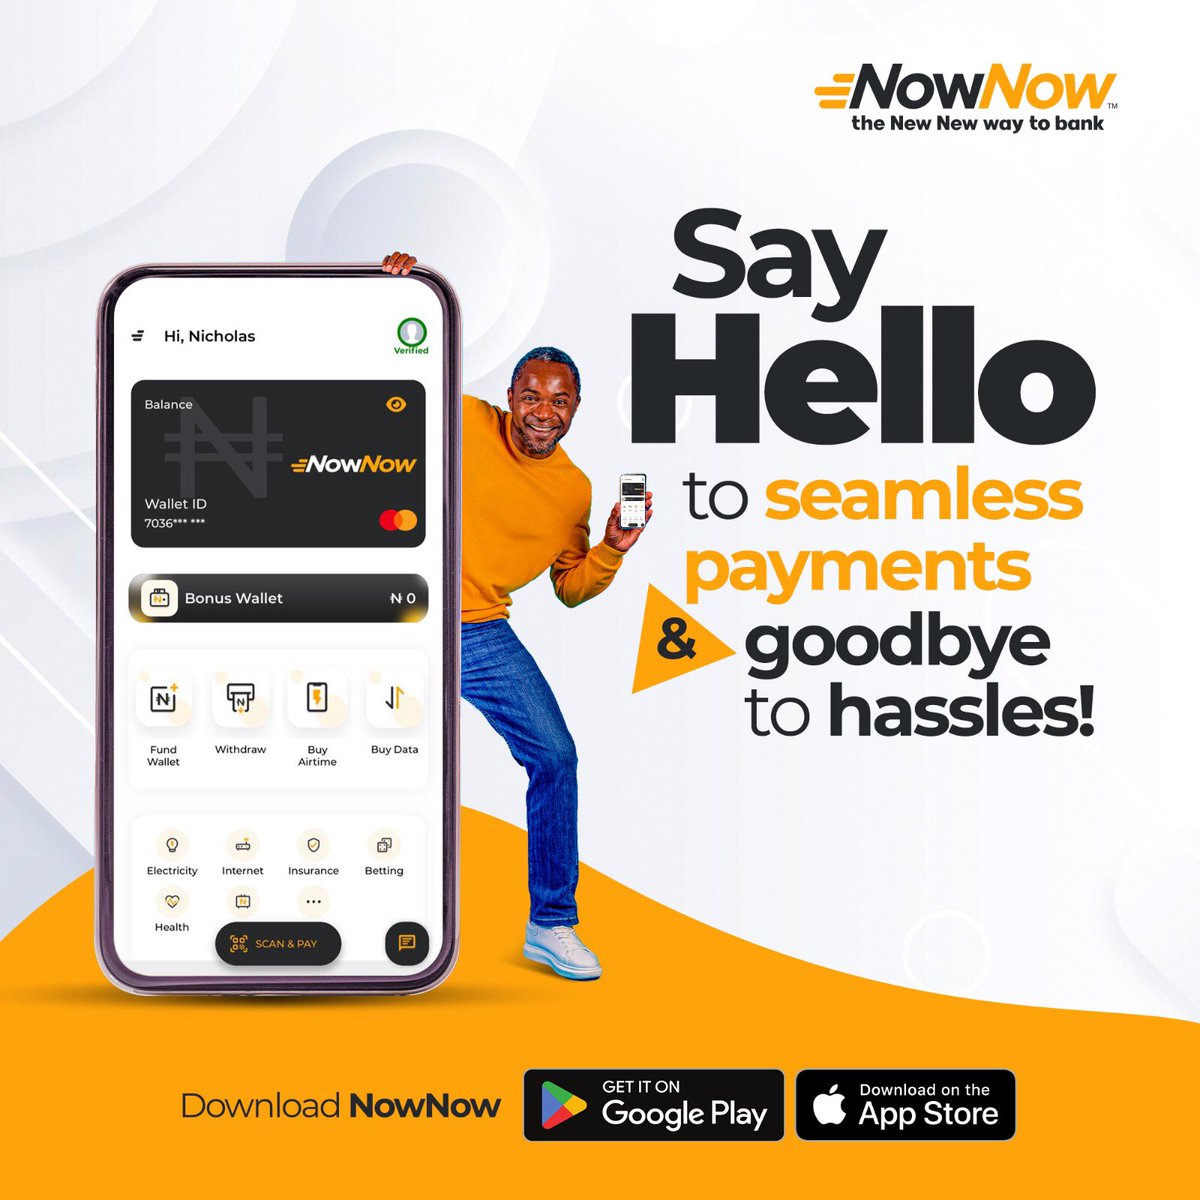 Enjoy seamless payments with NowNow,
Fast, Secure and Reliable services from us is guaranteed.

Download NowNow today.

#nownow #seamlesspayments